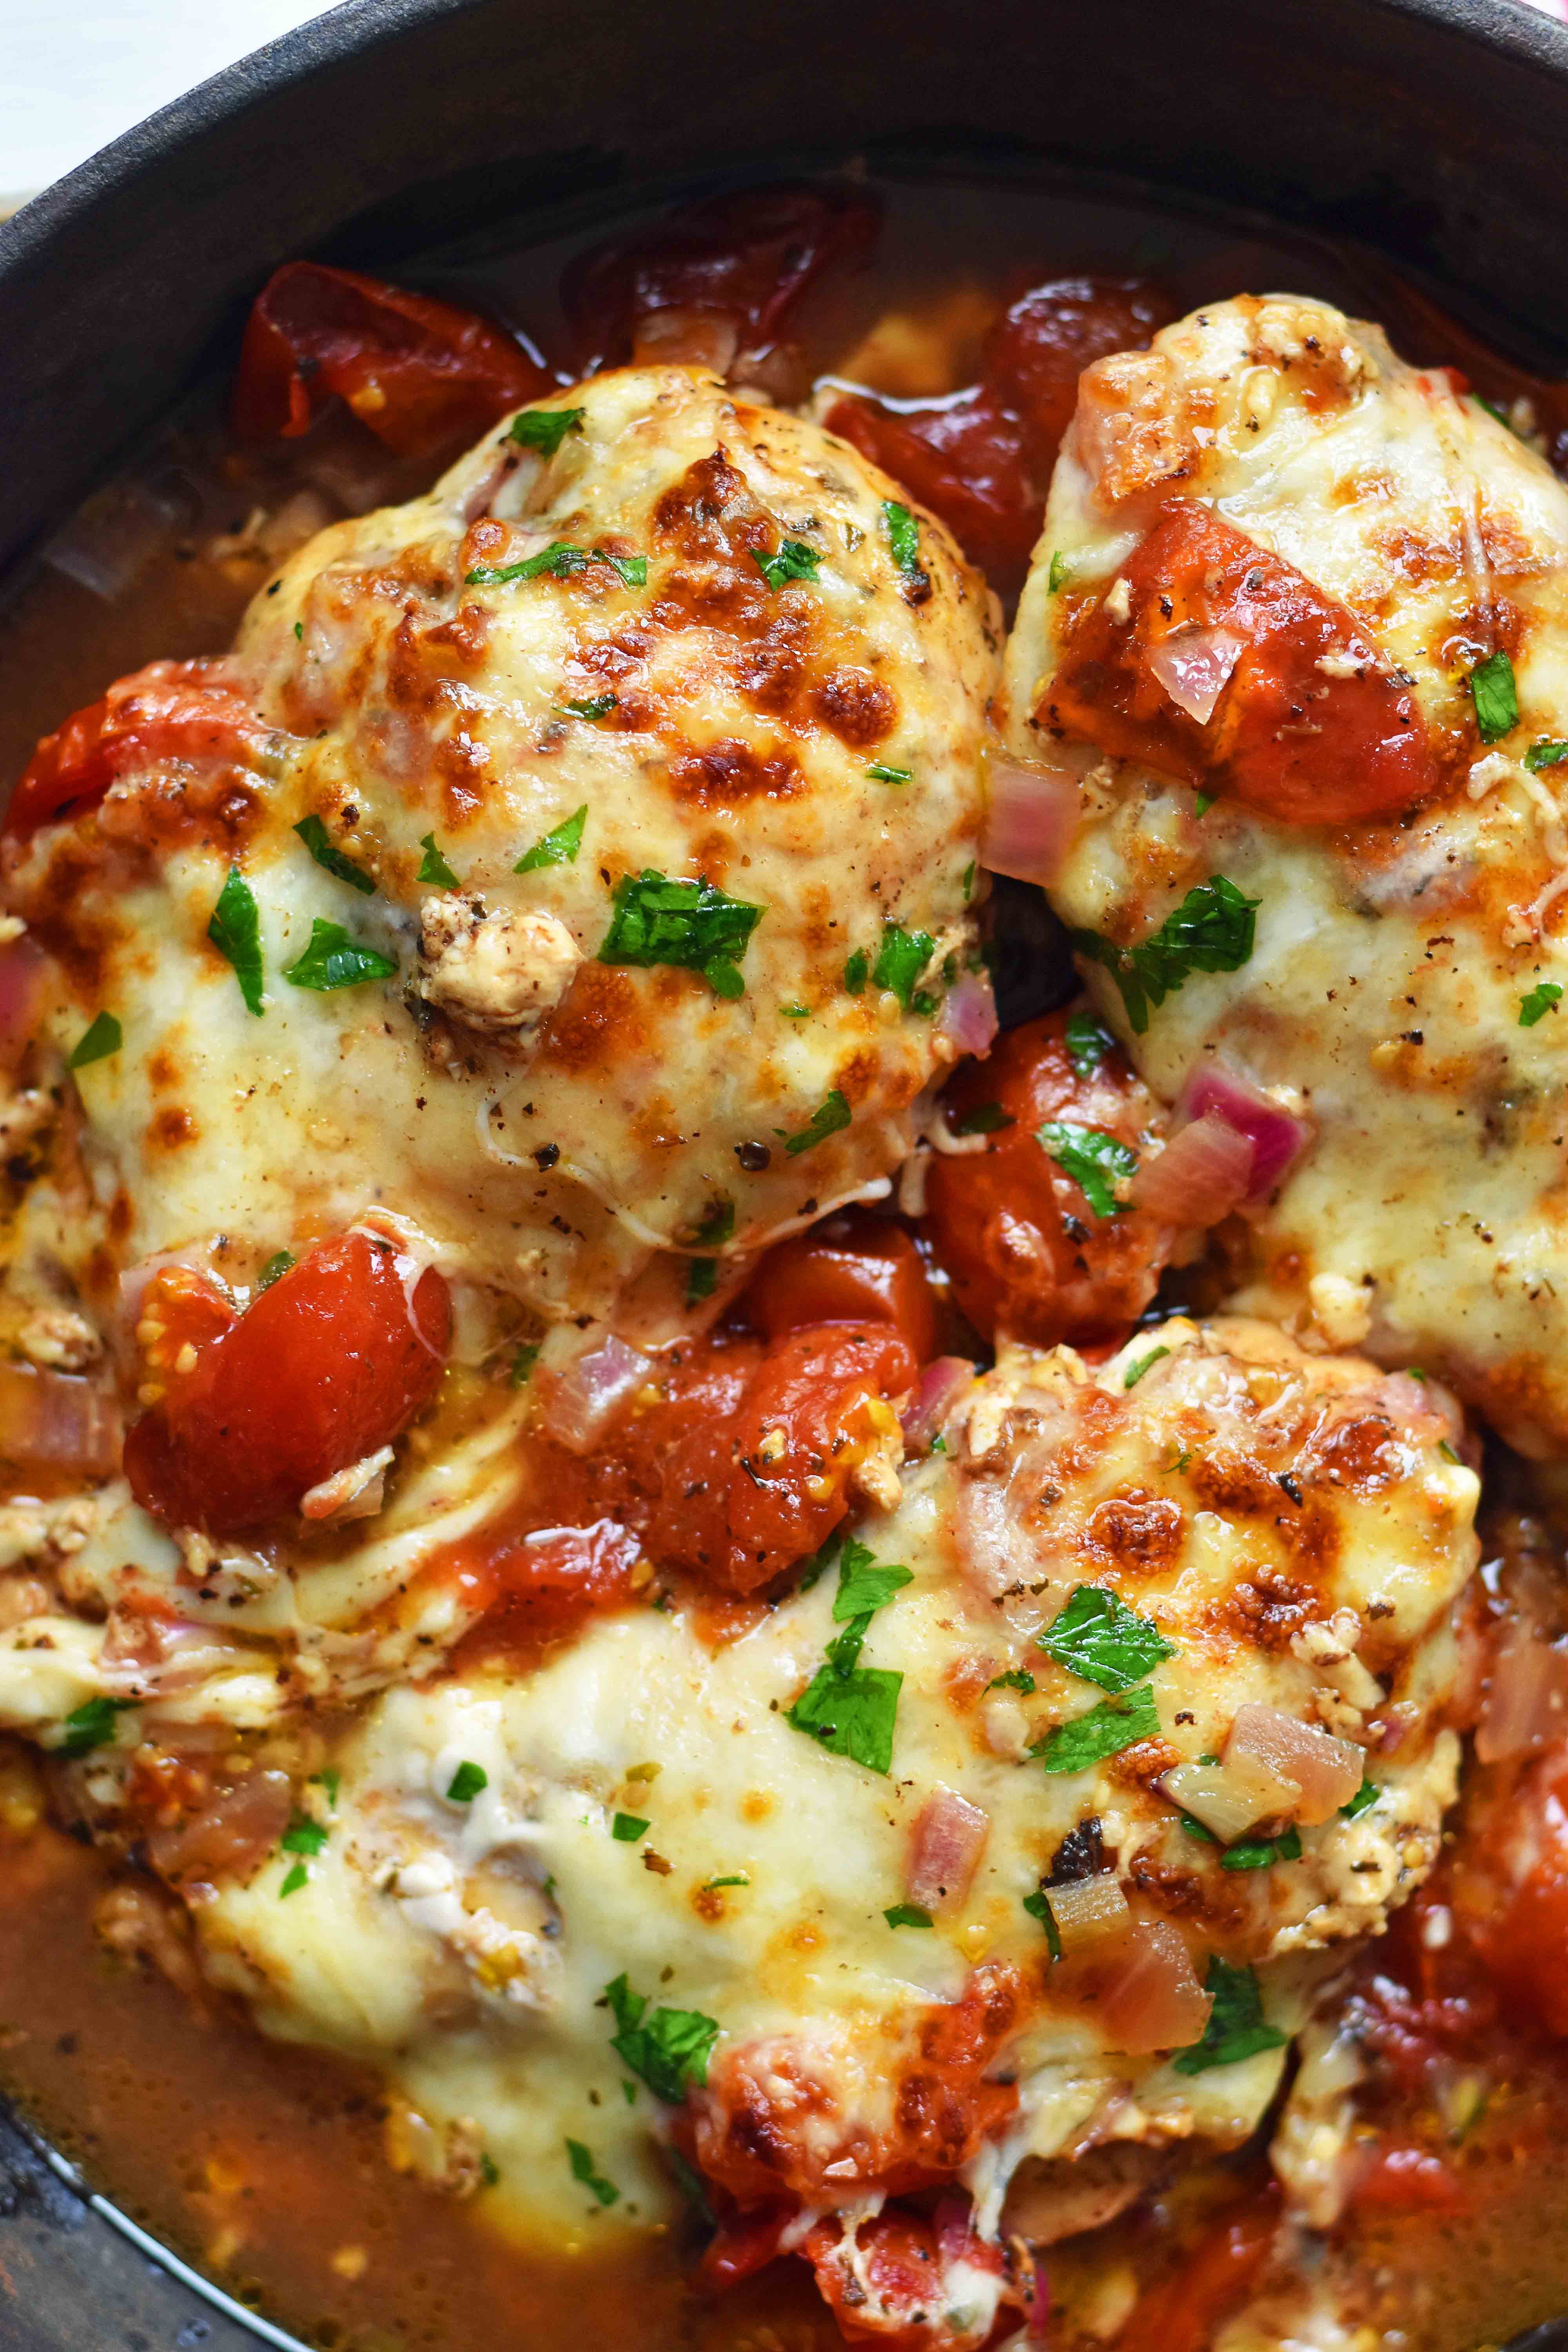 Baked Chicken Caprese. Oven-roasted chicken with Italian spices, sweet balsamic tomatoes, and melted mozzarella cheese. An easy 30-minute meal that your whole family will love. Chicken Breast with oven-roasted tomatoes and fresh mozzarella. www.modernhoney.com #dinner #30minutemeals #chicken